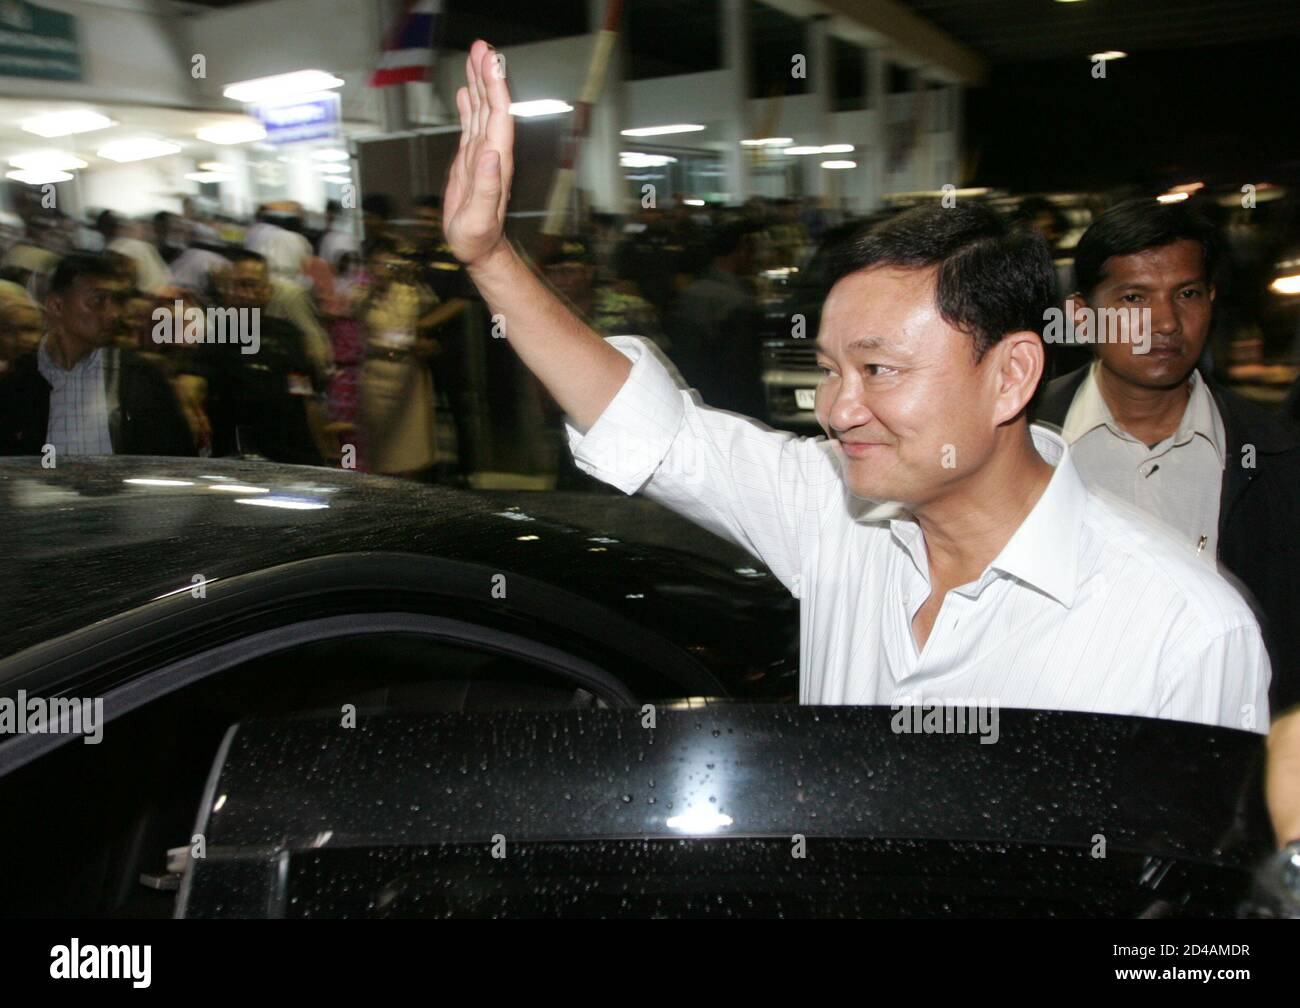 Thai Prime Minister Thaksin Shinawatra waves to residents of Yala province, 1,200 km (750 miles) south of Bangkok, on February 16, 2005. Thaksin arrived in the largely Muslim south on Wednesday with a stern message for villagers tempted to help separatist militants. REUTERS/Sukree Sukplang  SS/SA Stock Photo